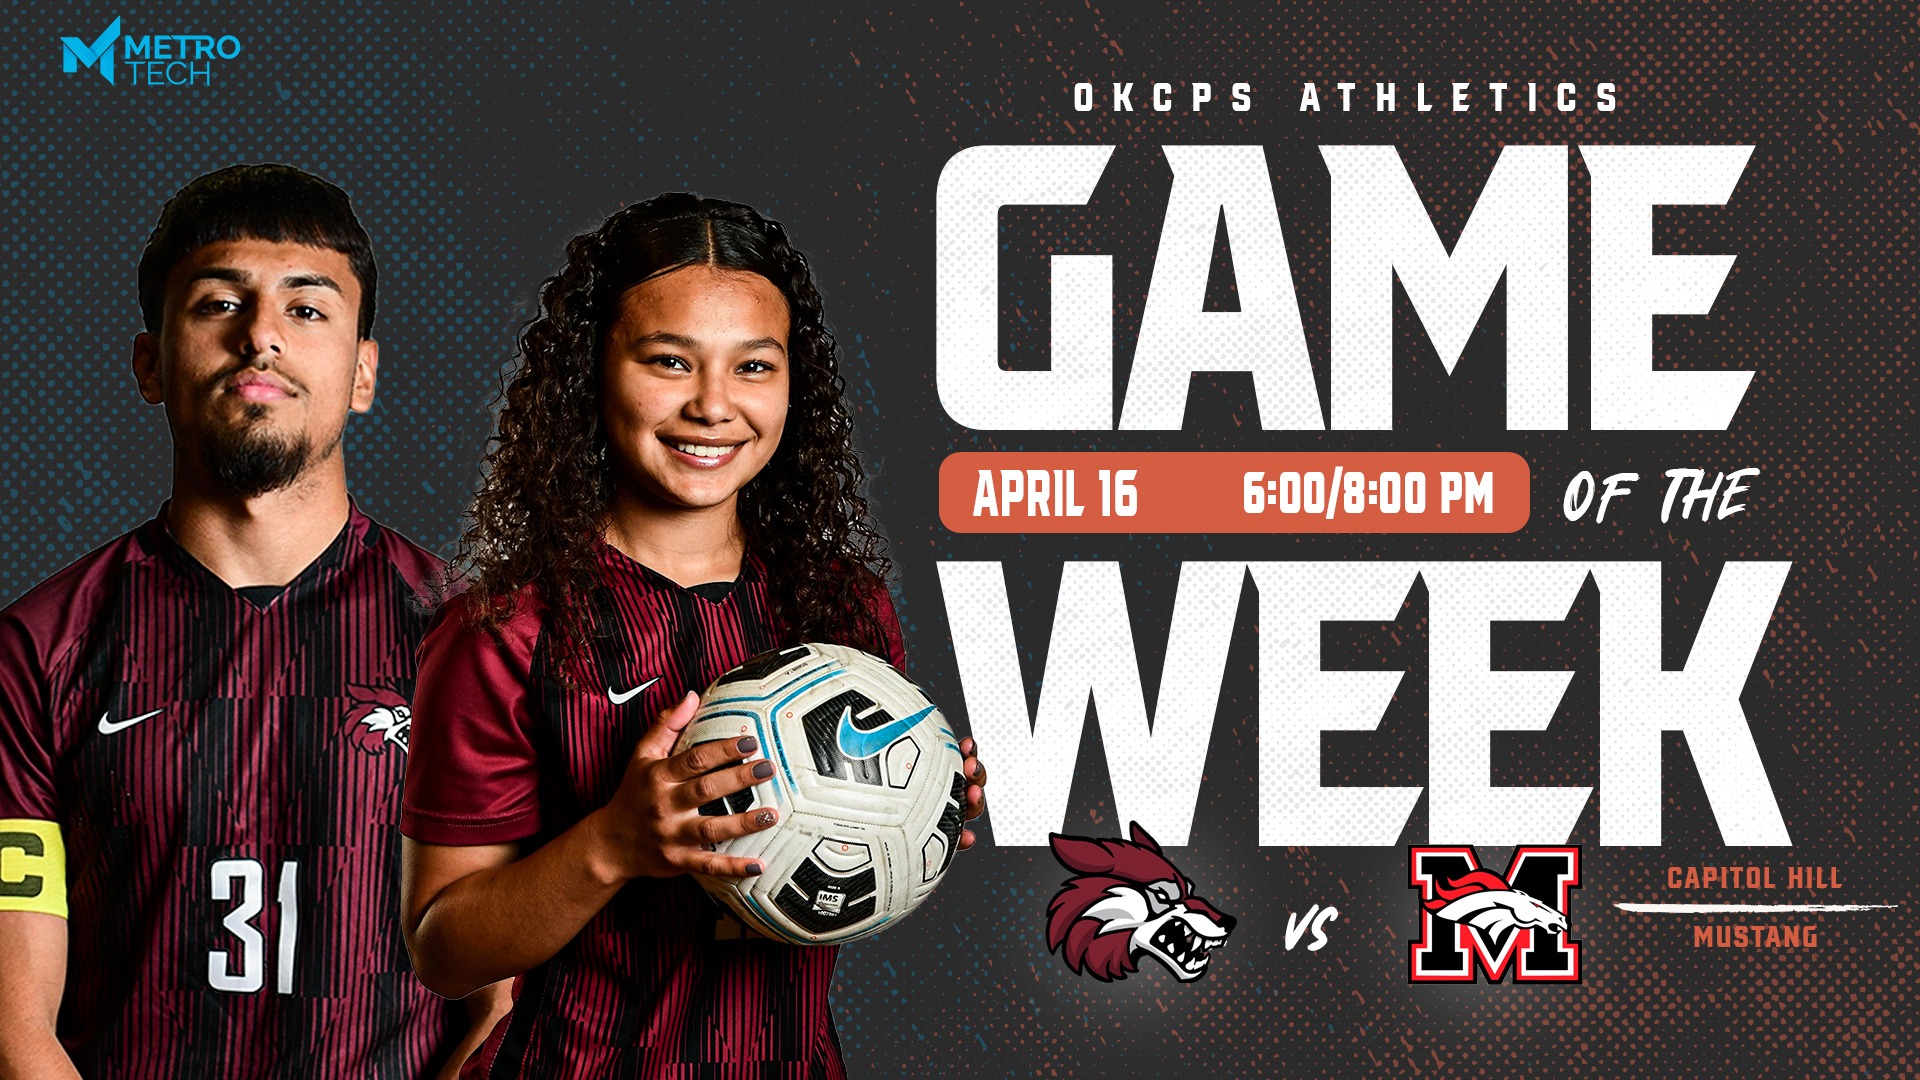 Slide 5 - Red Wolves Host Mustang in OKCPS Soccer Game of the Week - April 16